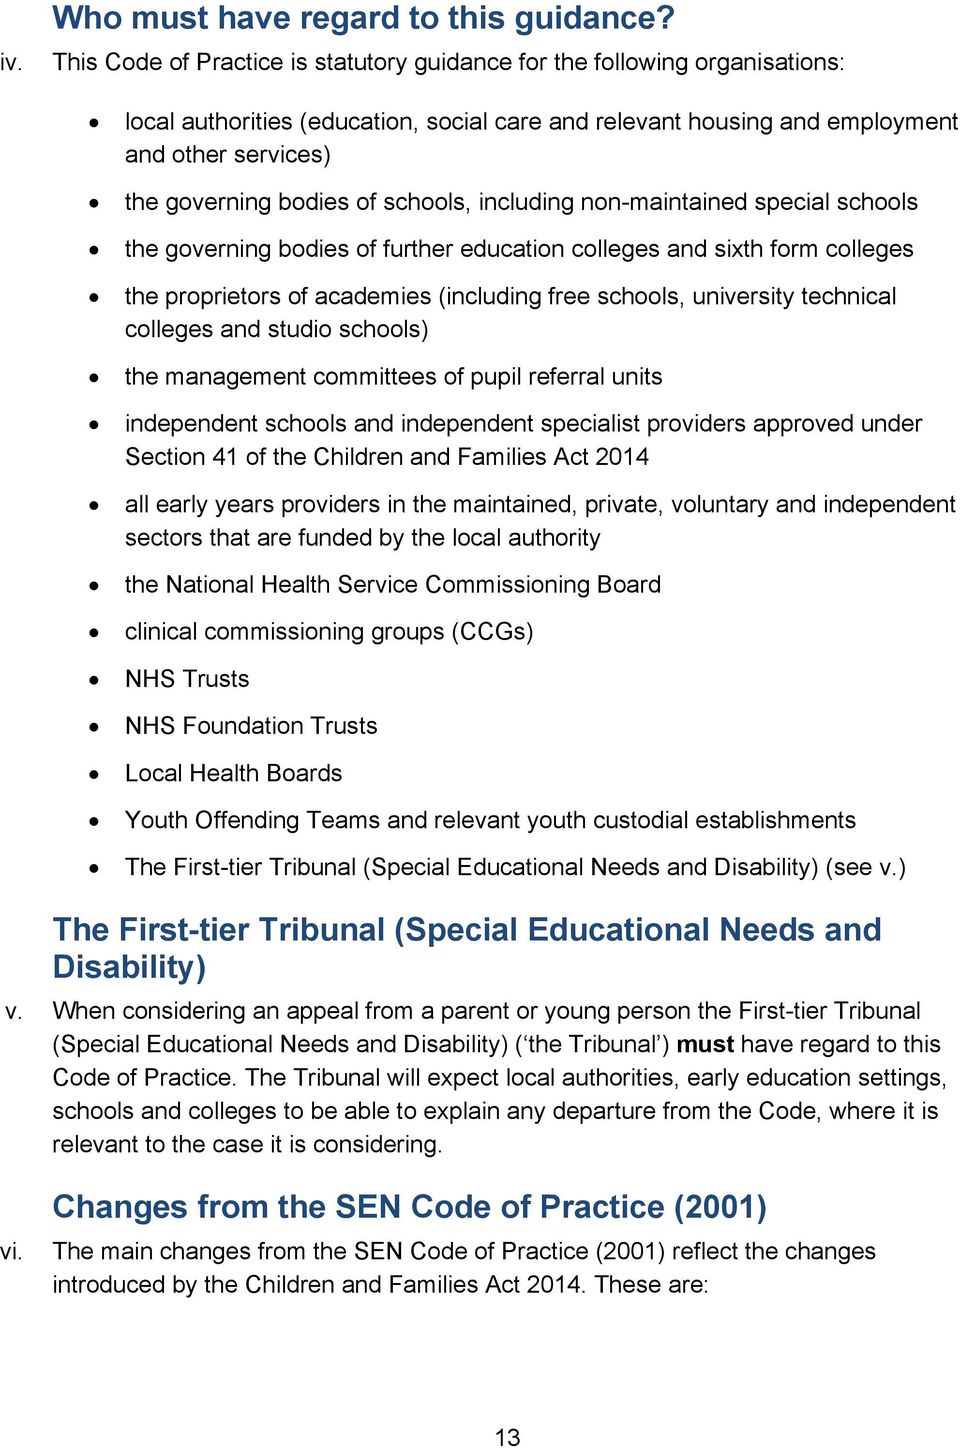 schools, including non-maintained special schools the governing bodies of further education colleges and sixth form colleges the proprietors of academies (including free schools, university technical